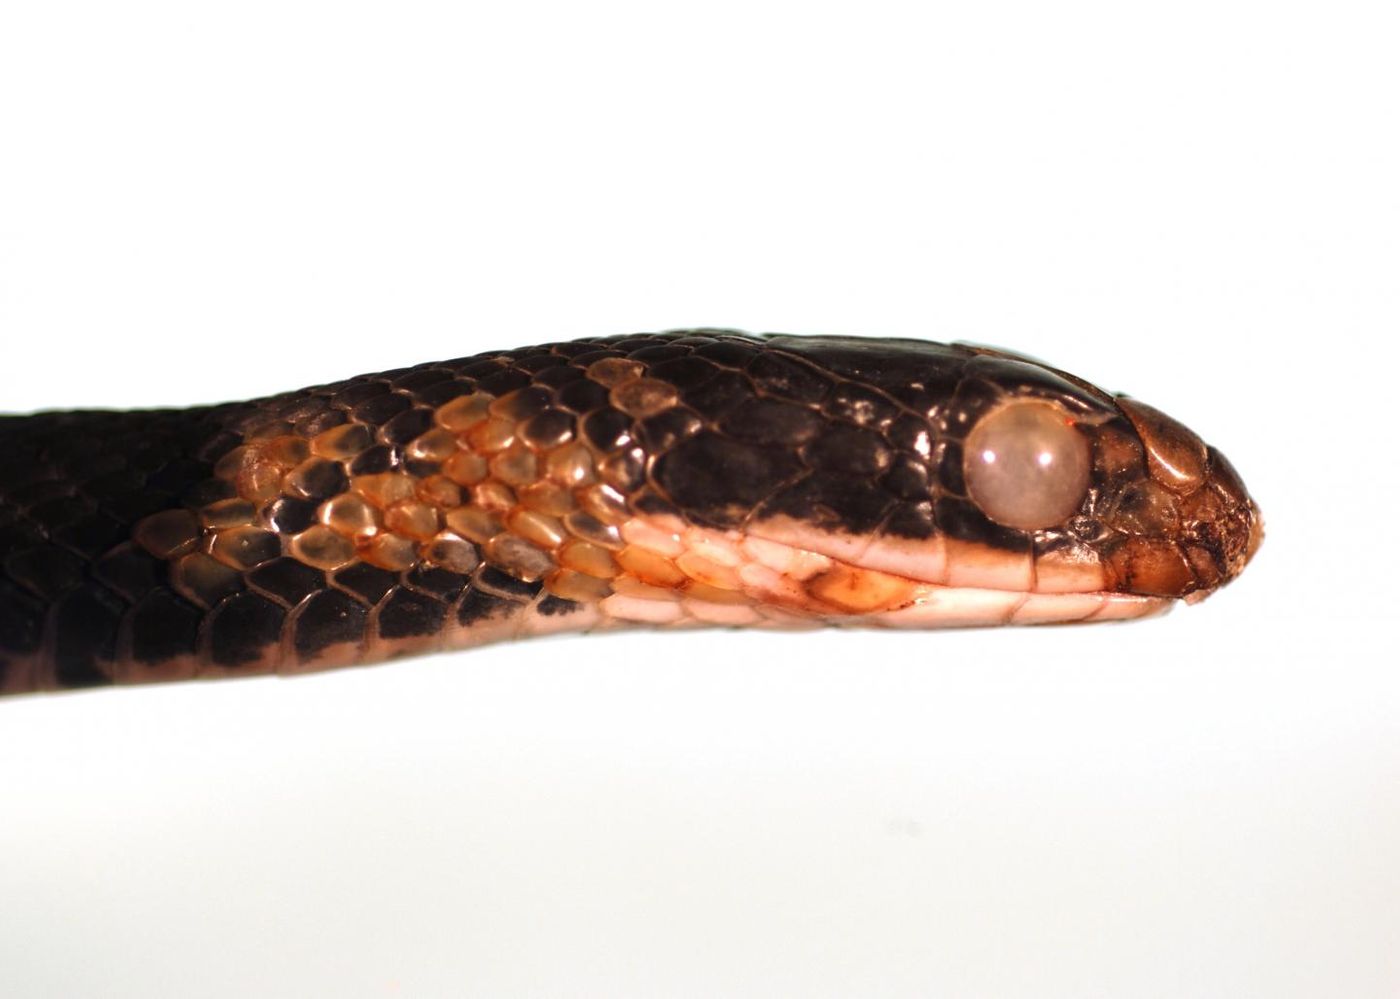 This is an eastern racer (Coluber constrictor) showing signs of fungal skin infection. Obvious external abnormalities are an opaque infected eye, roughened crusty scales on the chin, and several discolored roughened scales on the side of neck./ Credit: © USGS National Wildlife Health Center/D.E. Green